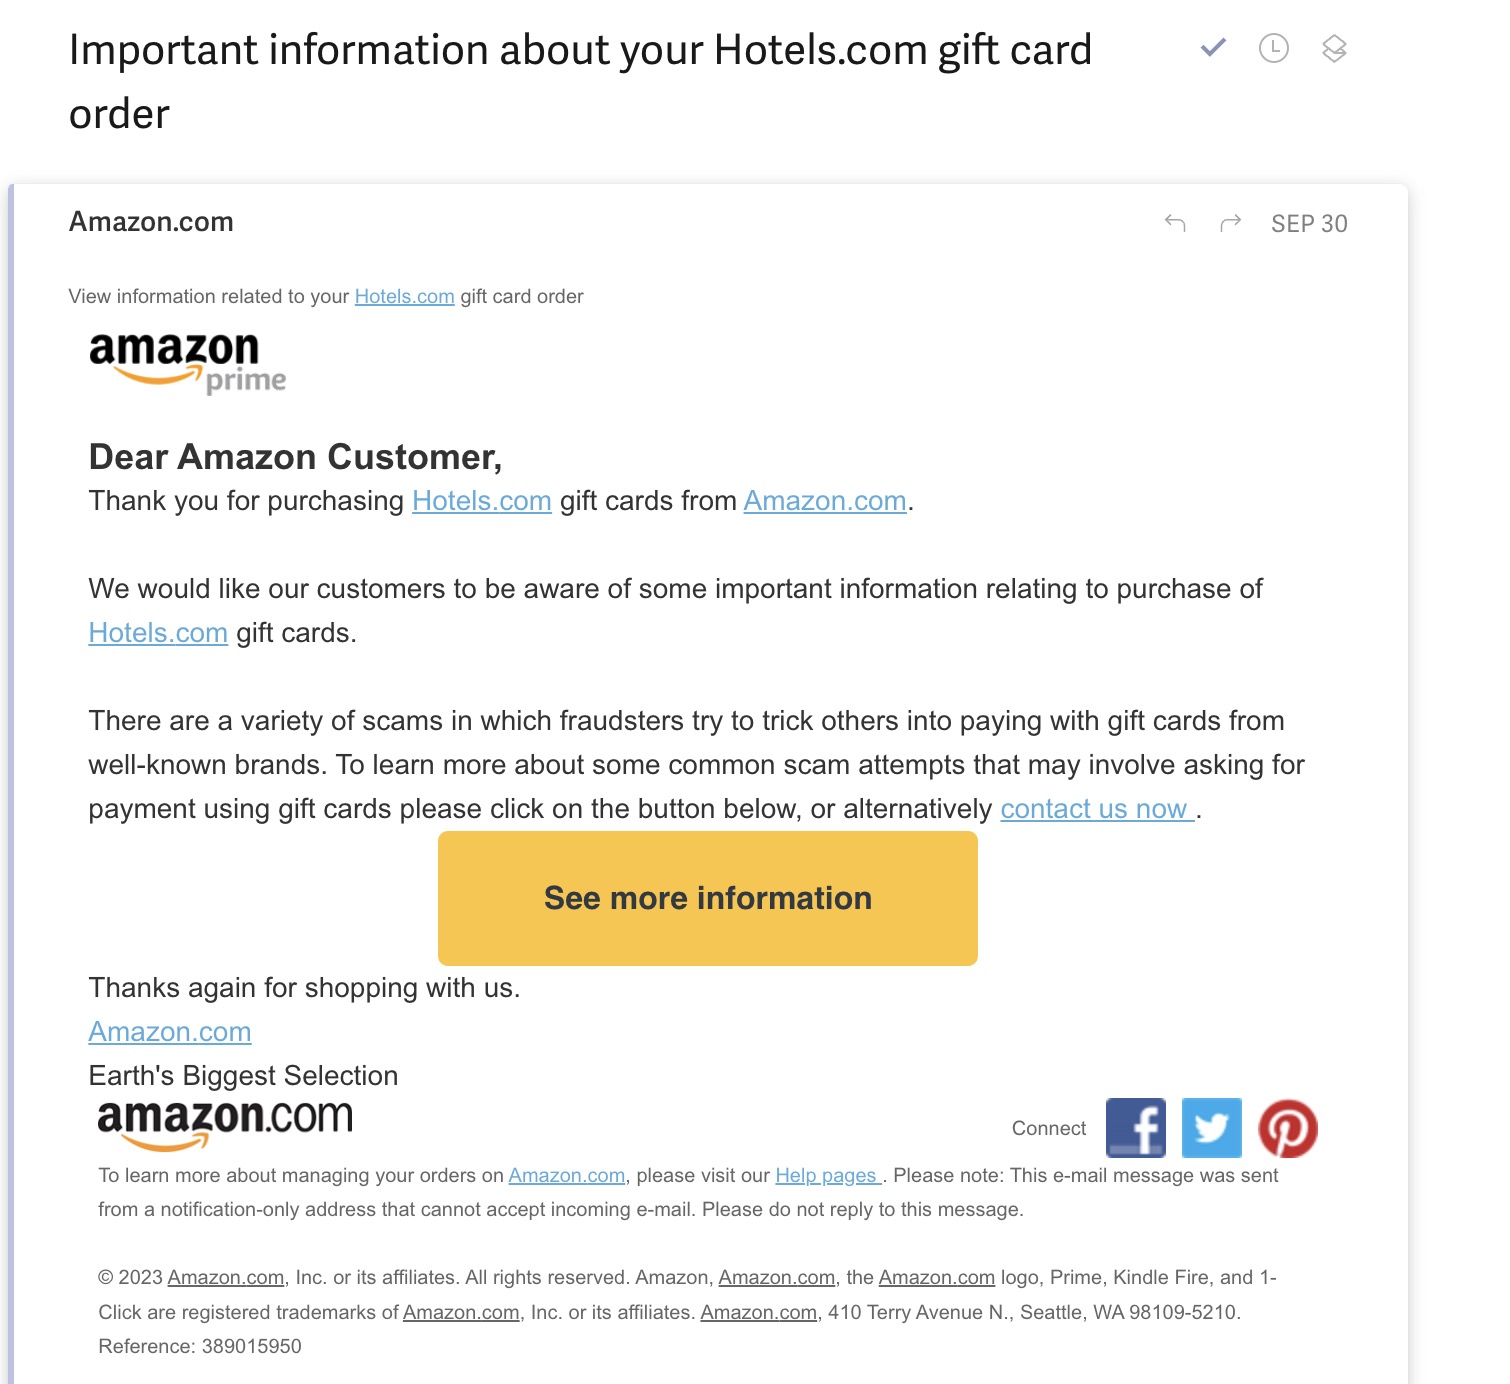 What should I do if my Amazon gift card has not arrived?